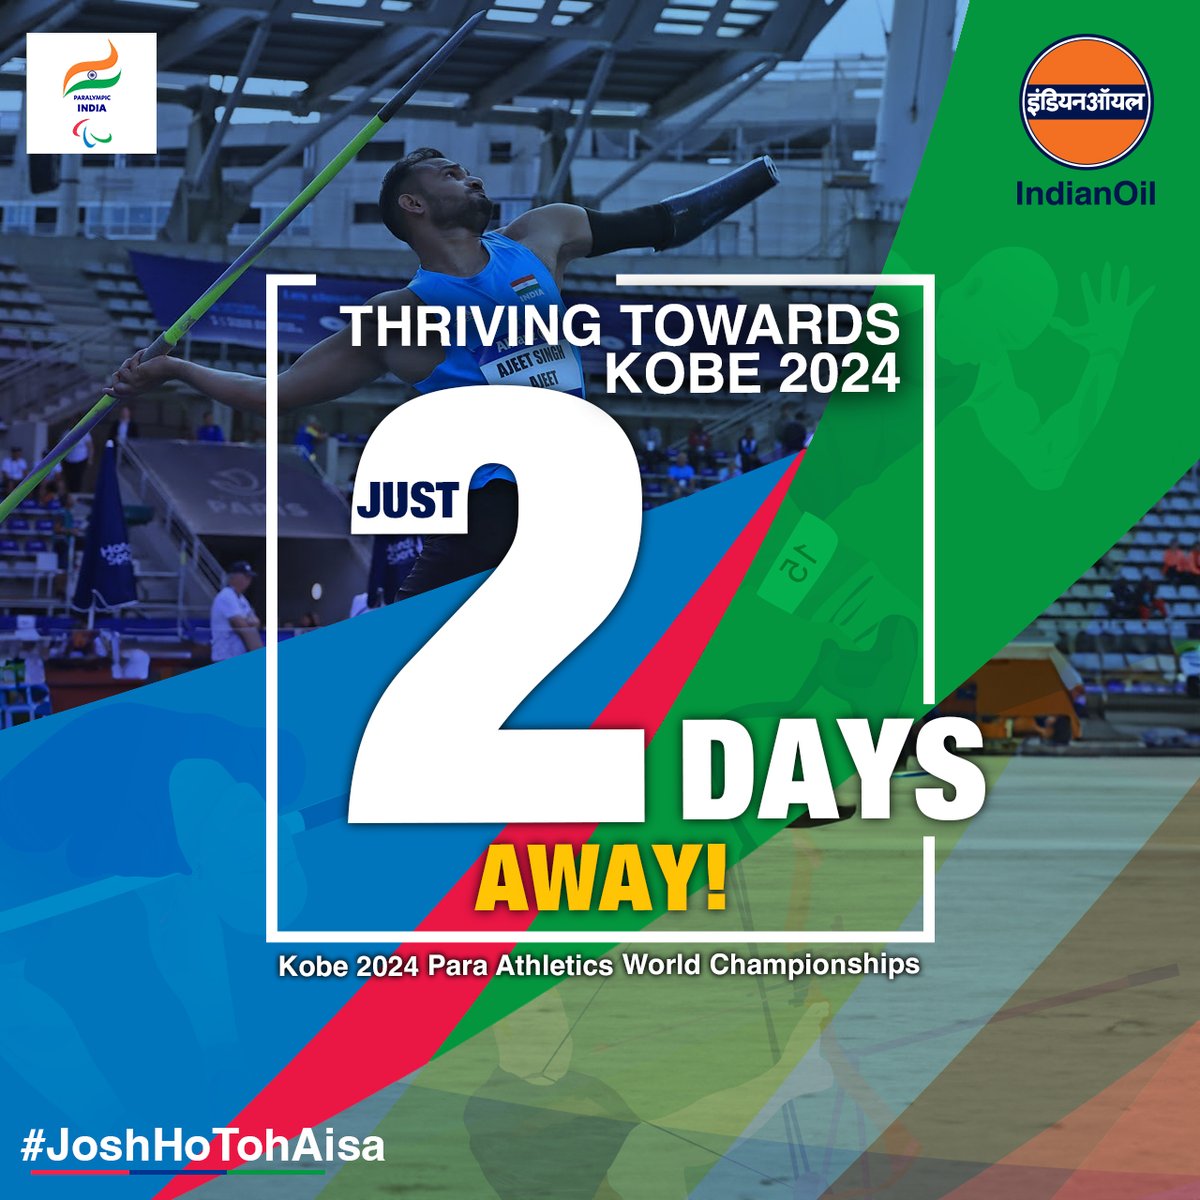 2 more days until the Kobe 2024 #ParaAthletics World Championships begin: 17th May to 25th May 2024! #IndianOil is honoured to stand by the Indian Team as they embody the spirit of 'Josh Ho Toh Aisa' on the global stage. Let's cheer them to victory!  #JoshHoTohAisa #2DaysToGo